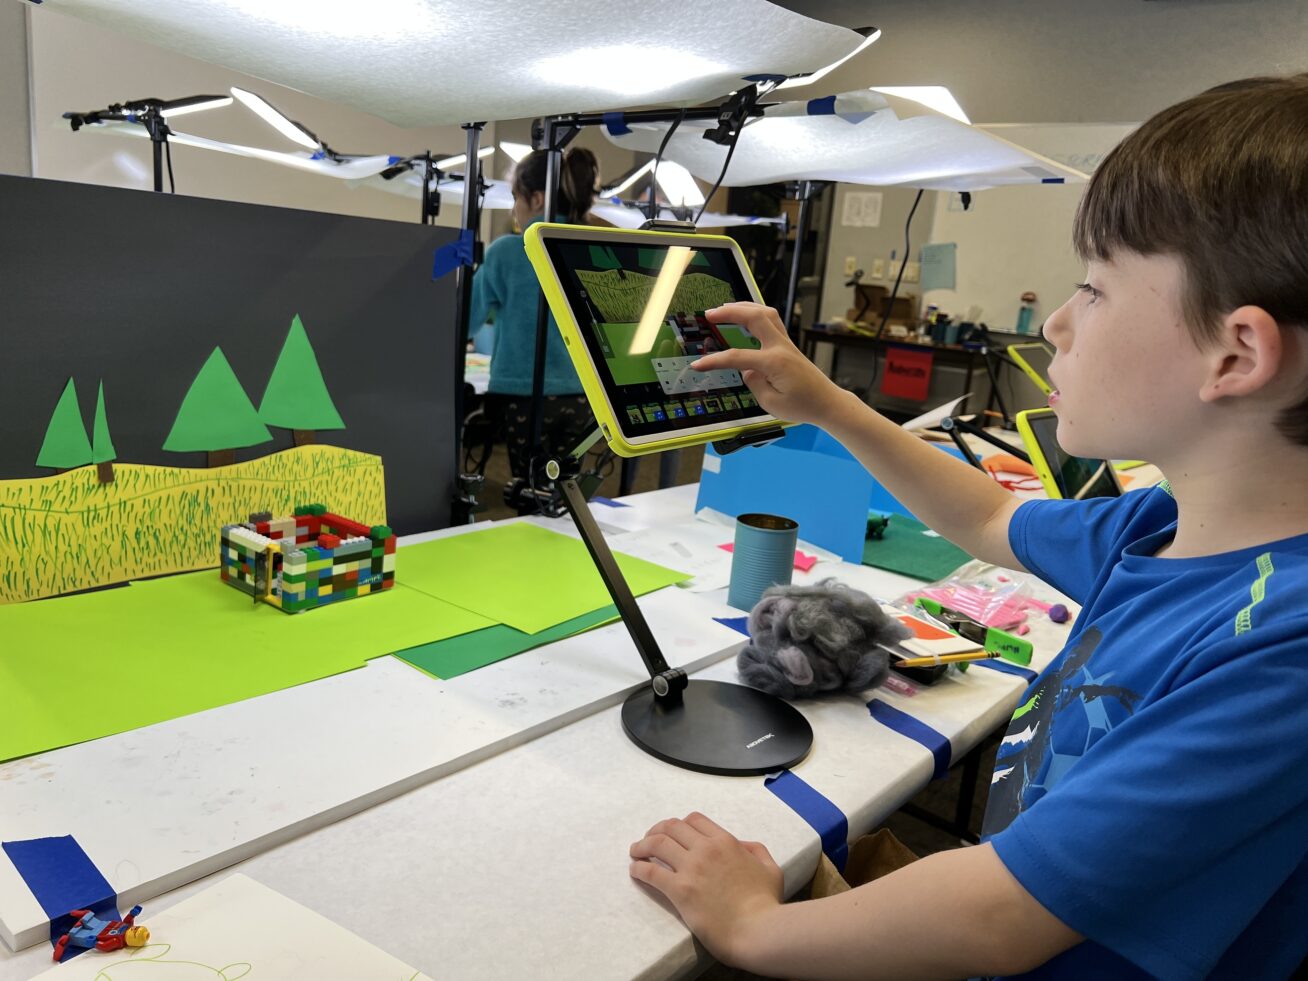 Color photograph of a child in a blue shirt using an iPad to film a lego building against a hand drawn set with trees and grass.